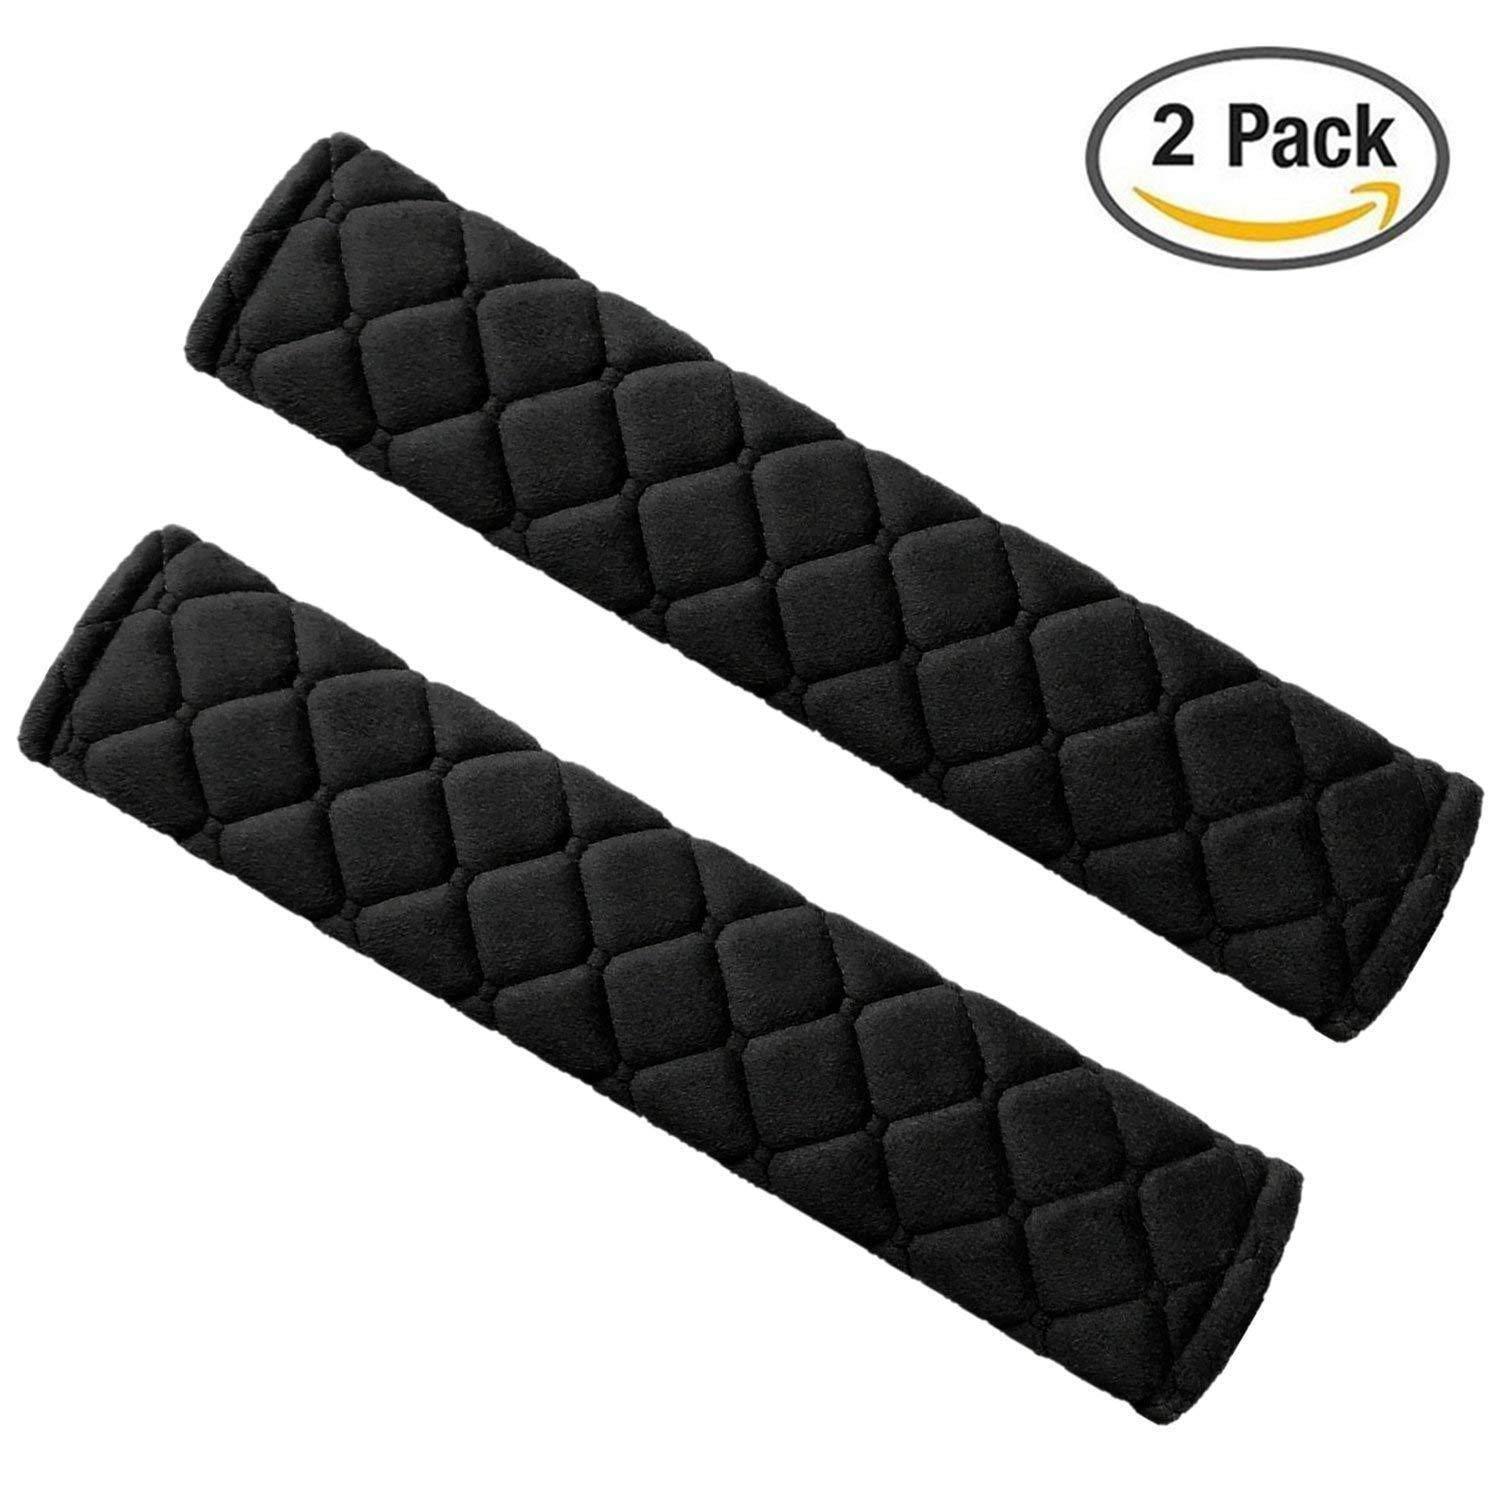 Seat Belt Covers for Infiniti 2pcs Black Carbon Fiber Car Seatbelt Shoulder Strap Pads Safety Belt Cushions Protective Sleeves with Printed Infiniti Car Logo 